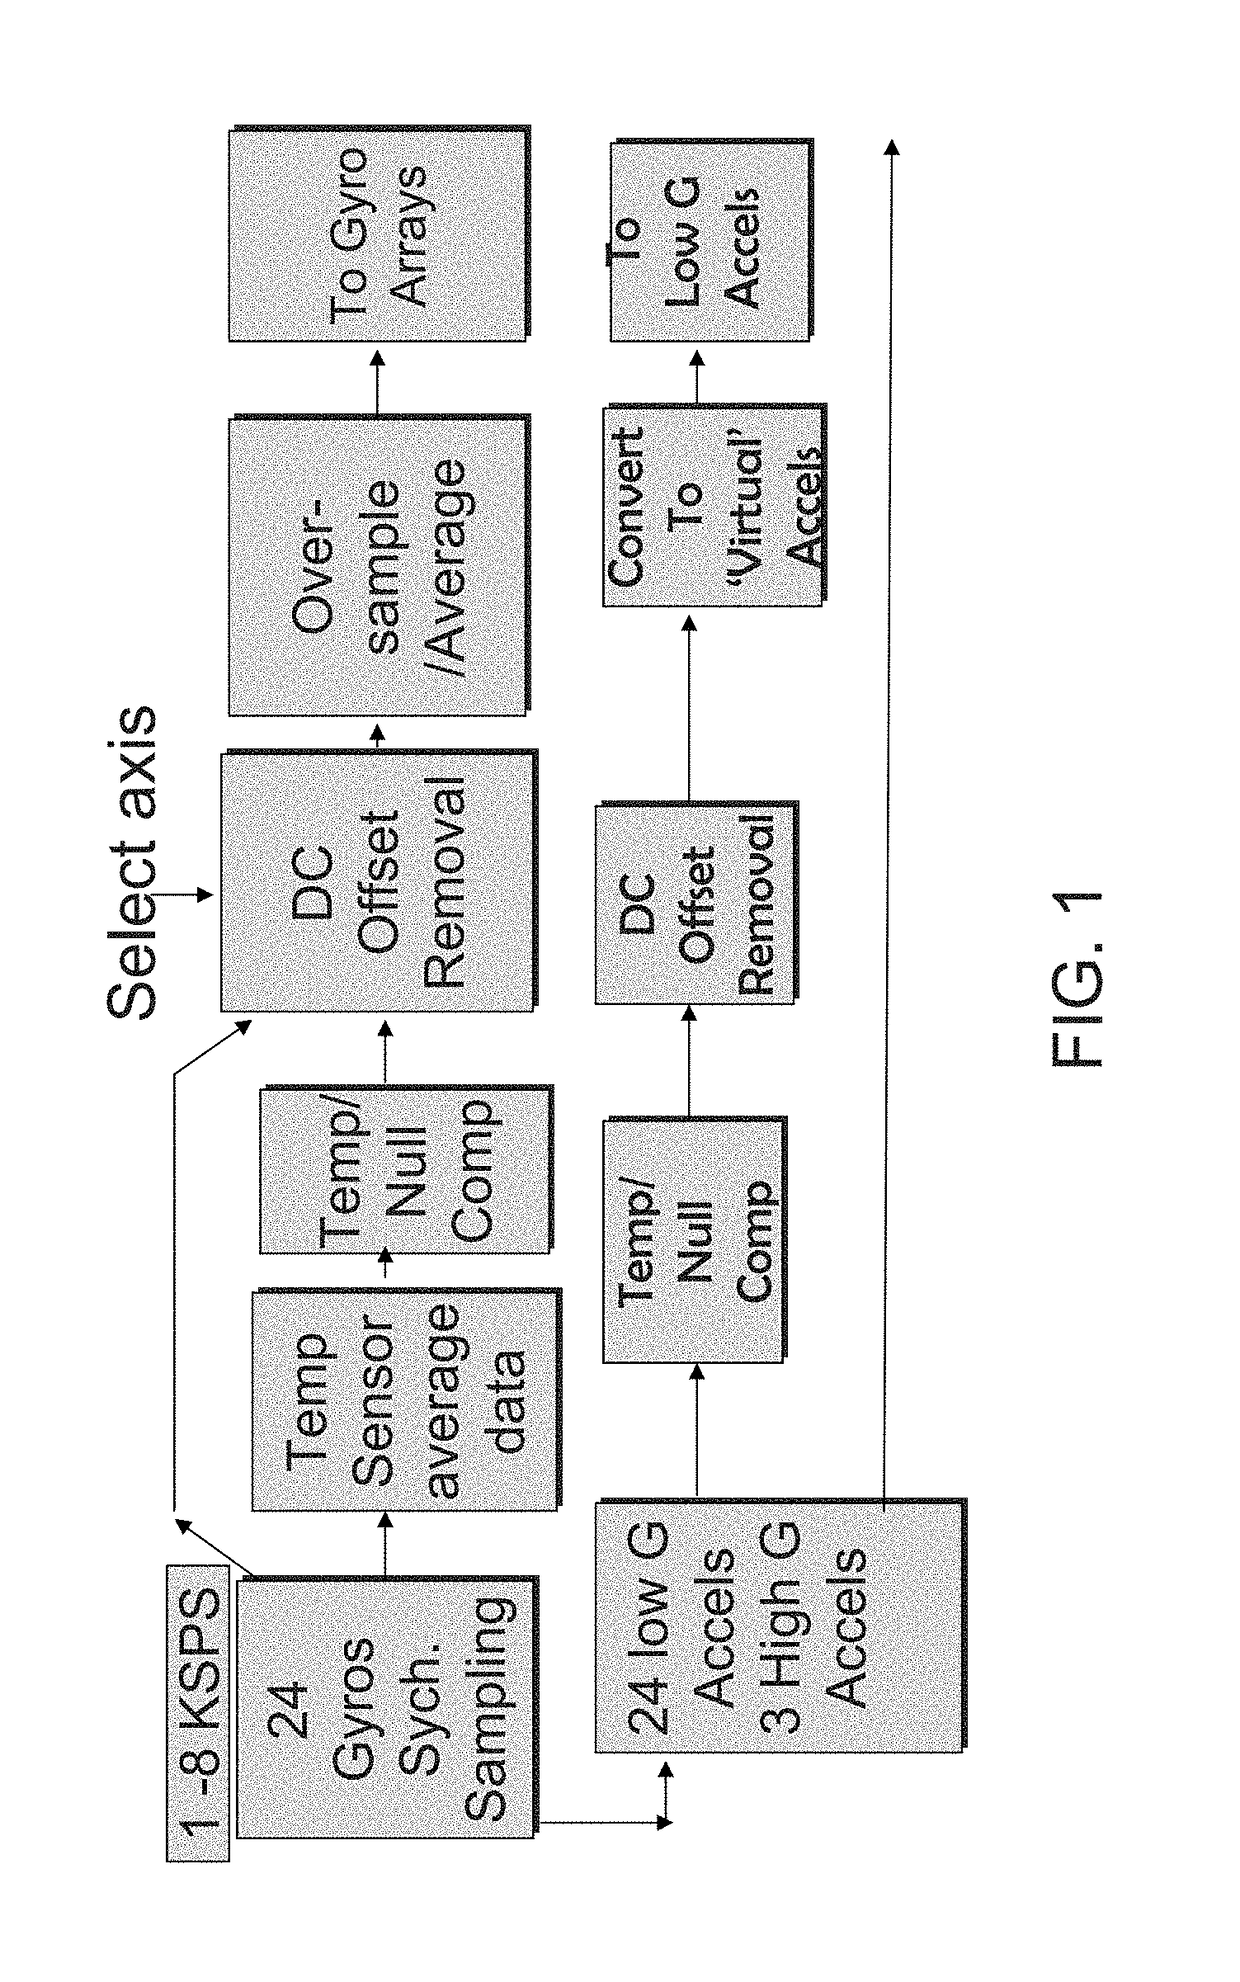 Miniaturized inertial measurement and navigation sensor device and associated methods